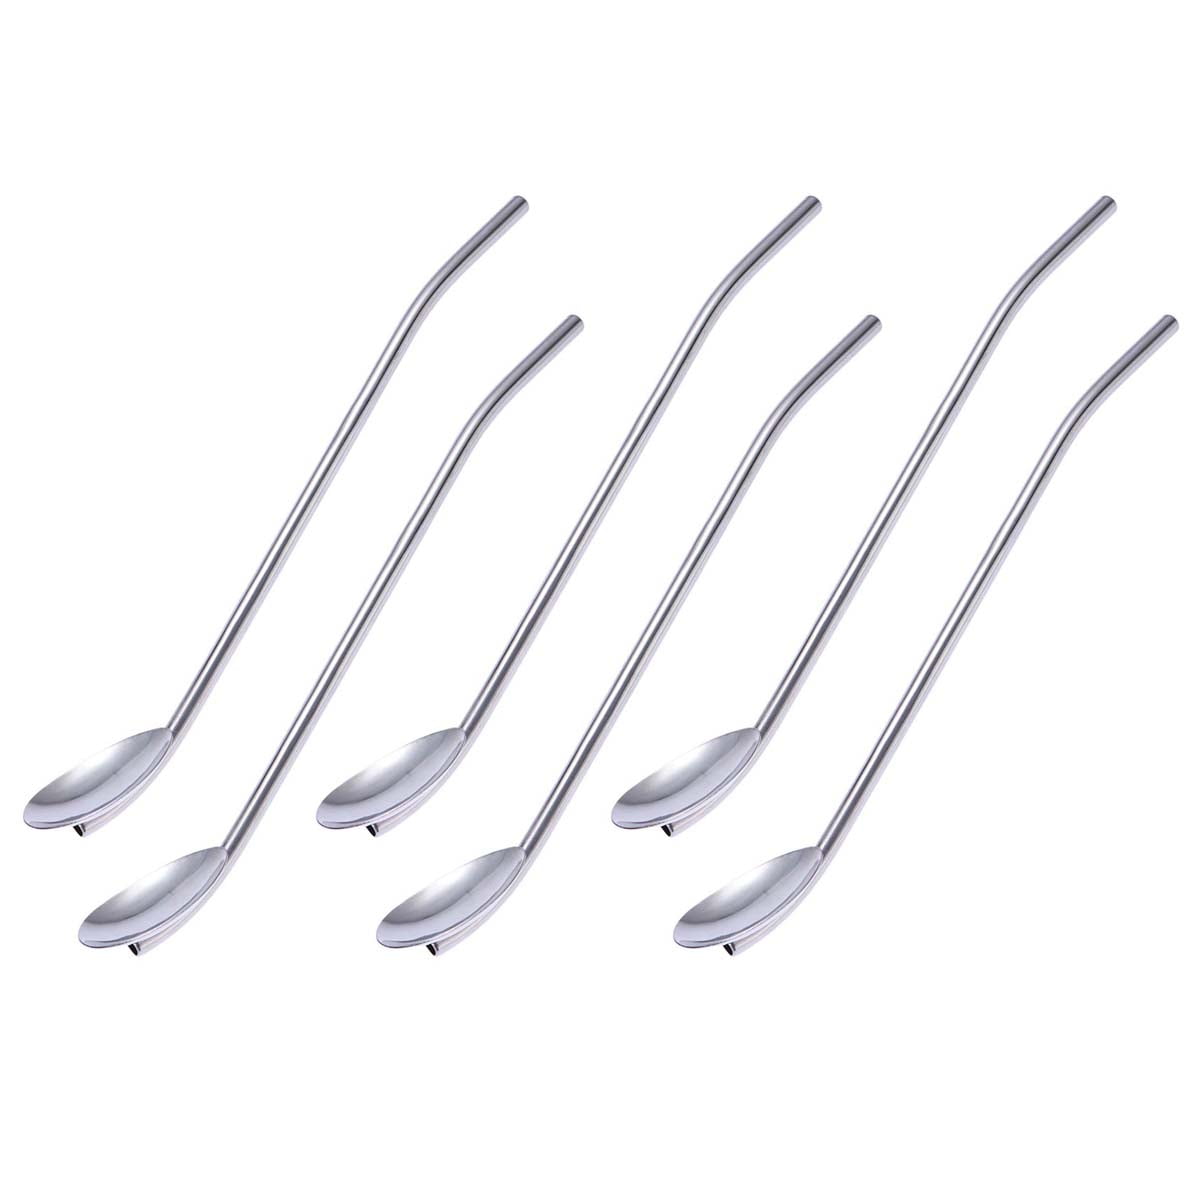 Hemoton 6 PCS/Pack Stainless Steel Drinking Spoon Straw Long Spoon Straws Stirrer Spoon Cocktail Spoons Set 